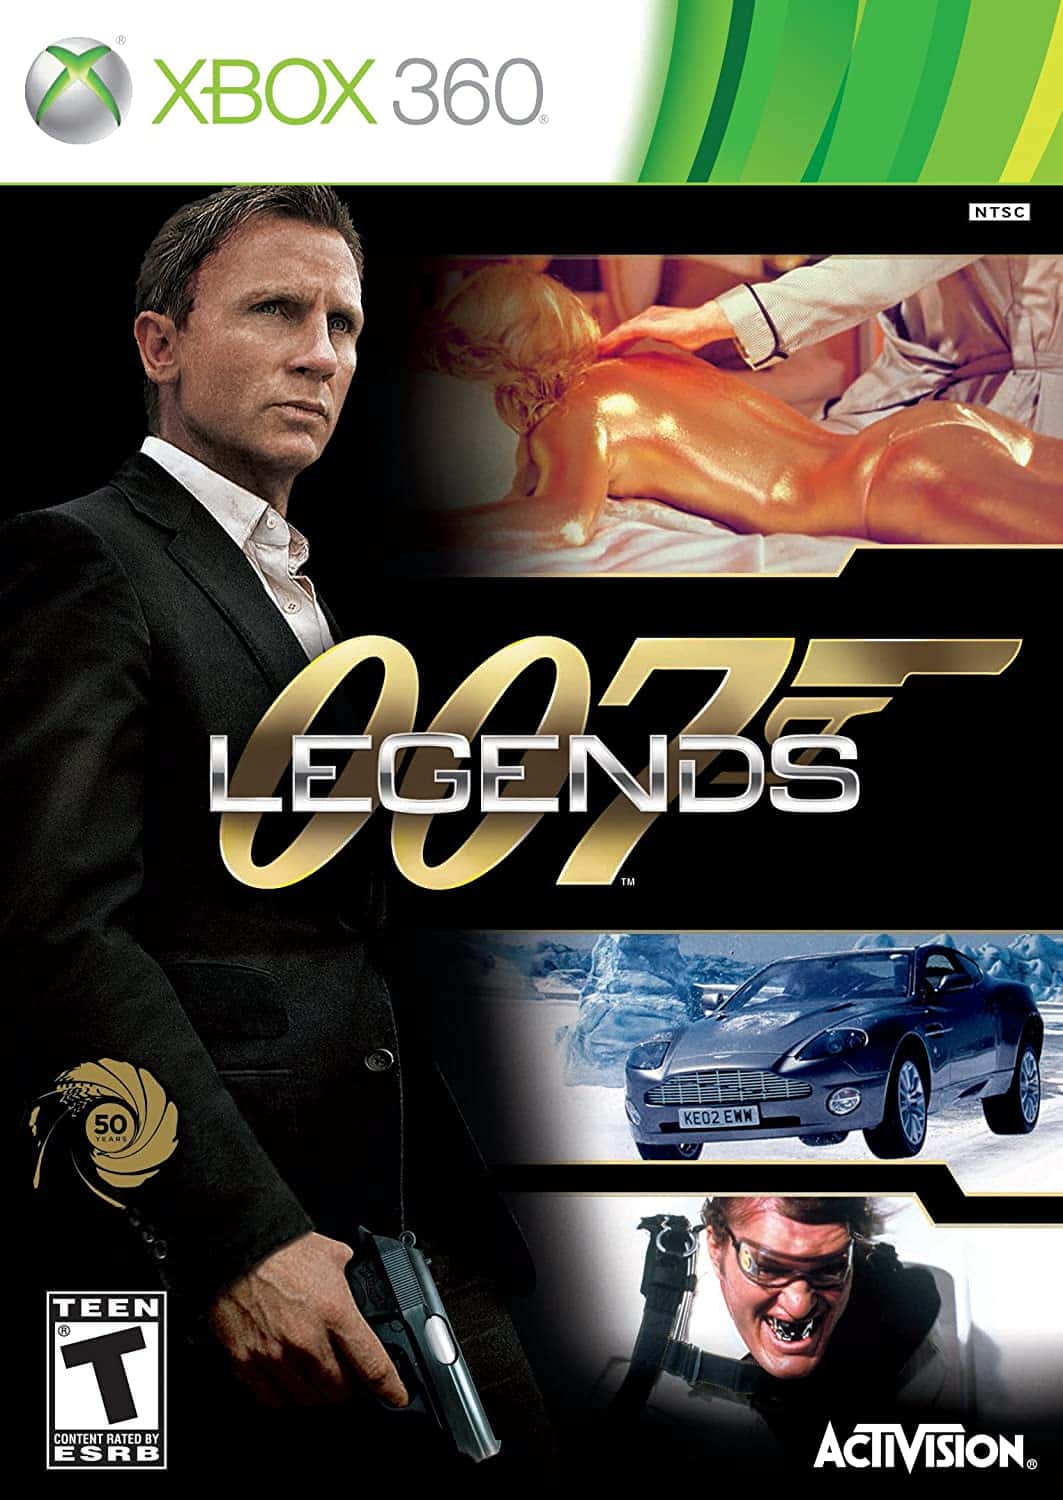 007 Legends player count stats